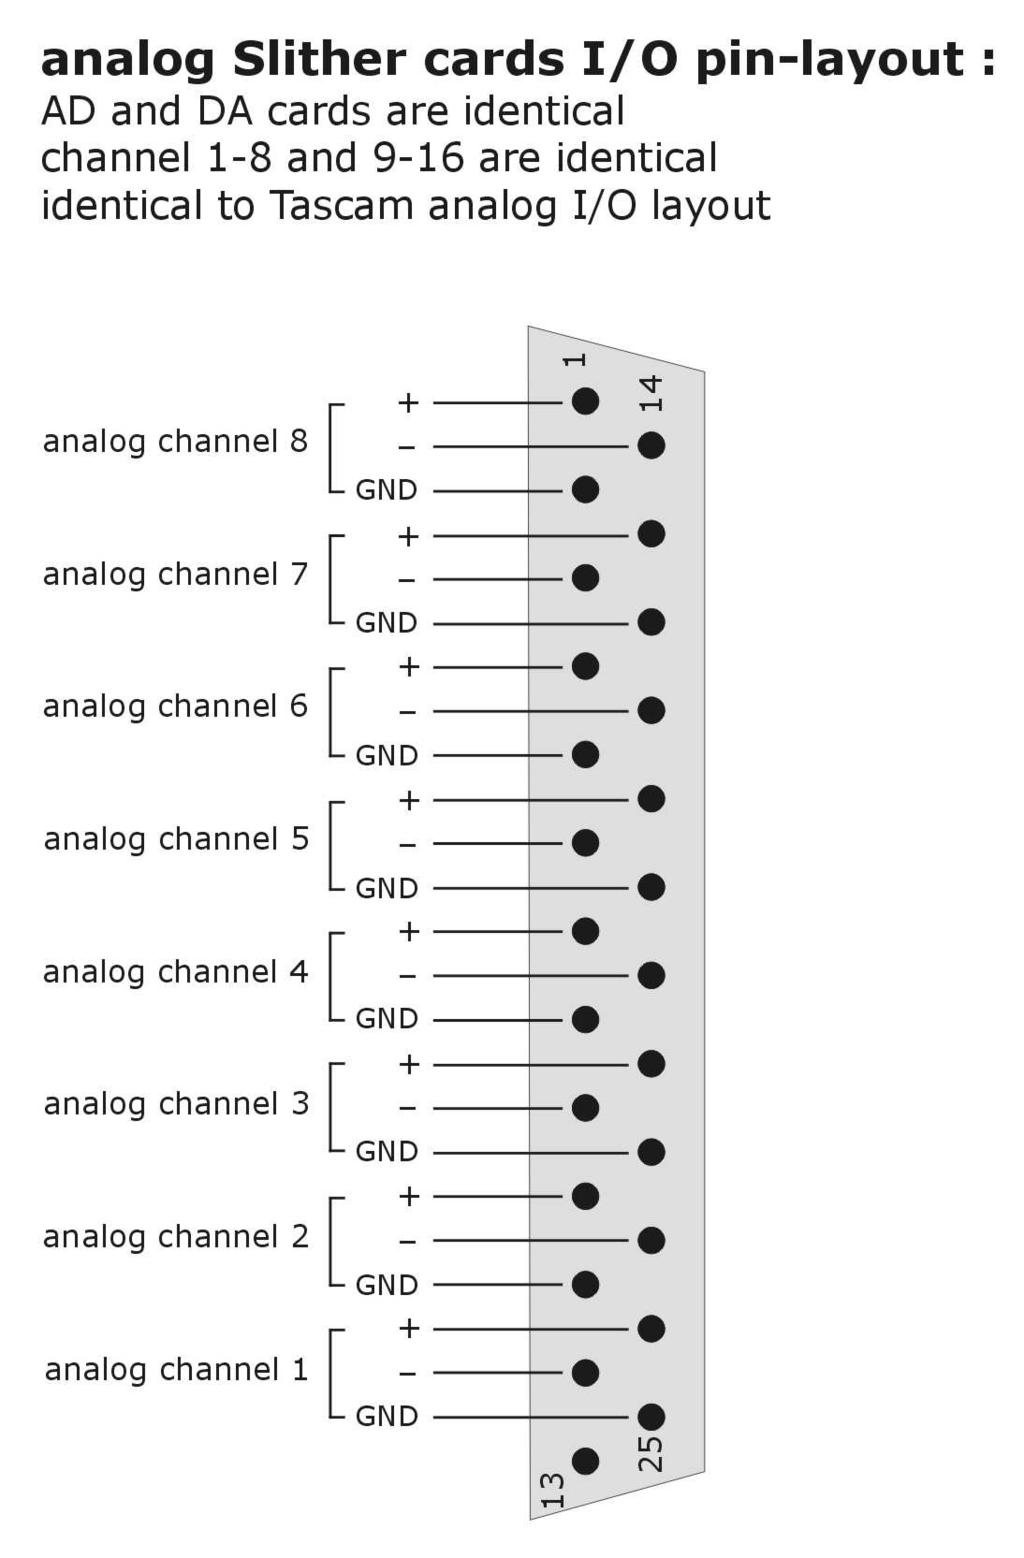 SLITHER PIN-OUTS ANALOGUE 1 Channel 8 HOT 14 Channel 8 COLD 2 Channel 8 GROUND 15 Channel 7 HOT 3 Channel 7 COLD 16 Channel 7 GROUND 4 Channel 6 HOT 17 Channel 6 COLD 5 Channel 6 GROUND 18 Channel 5